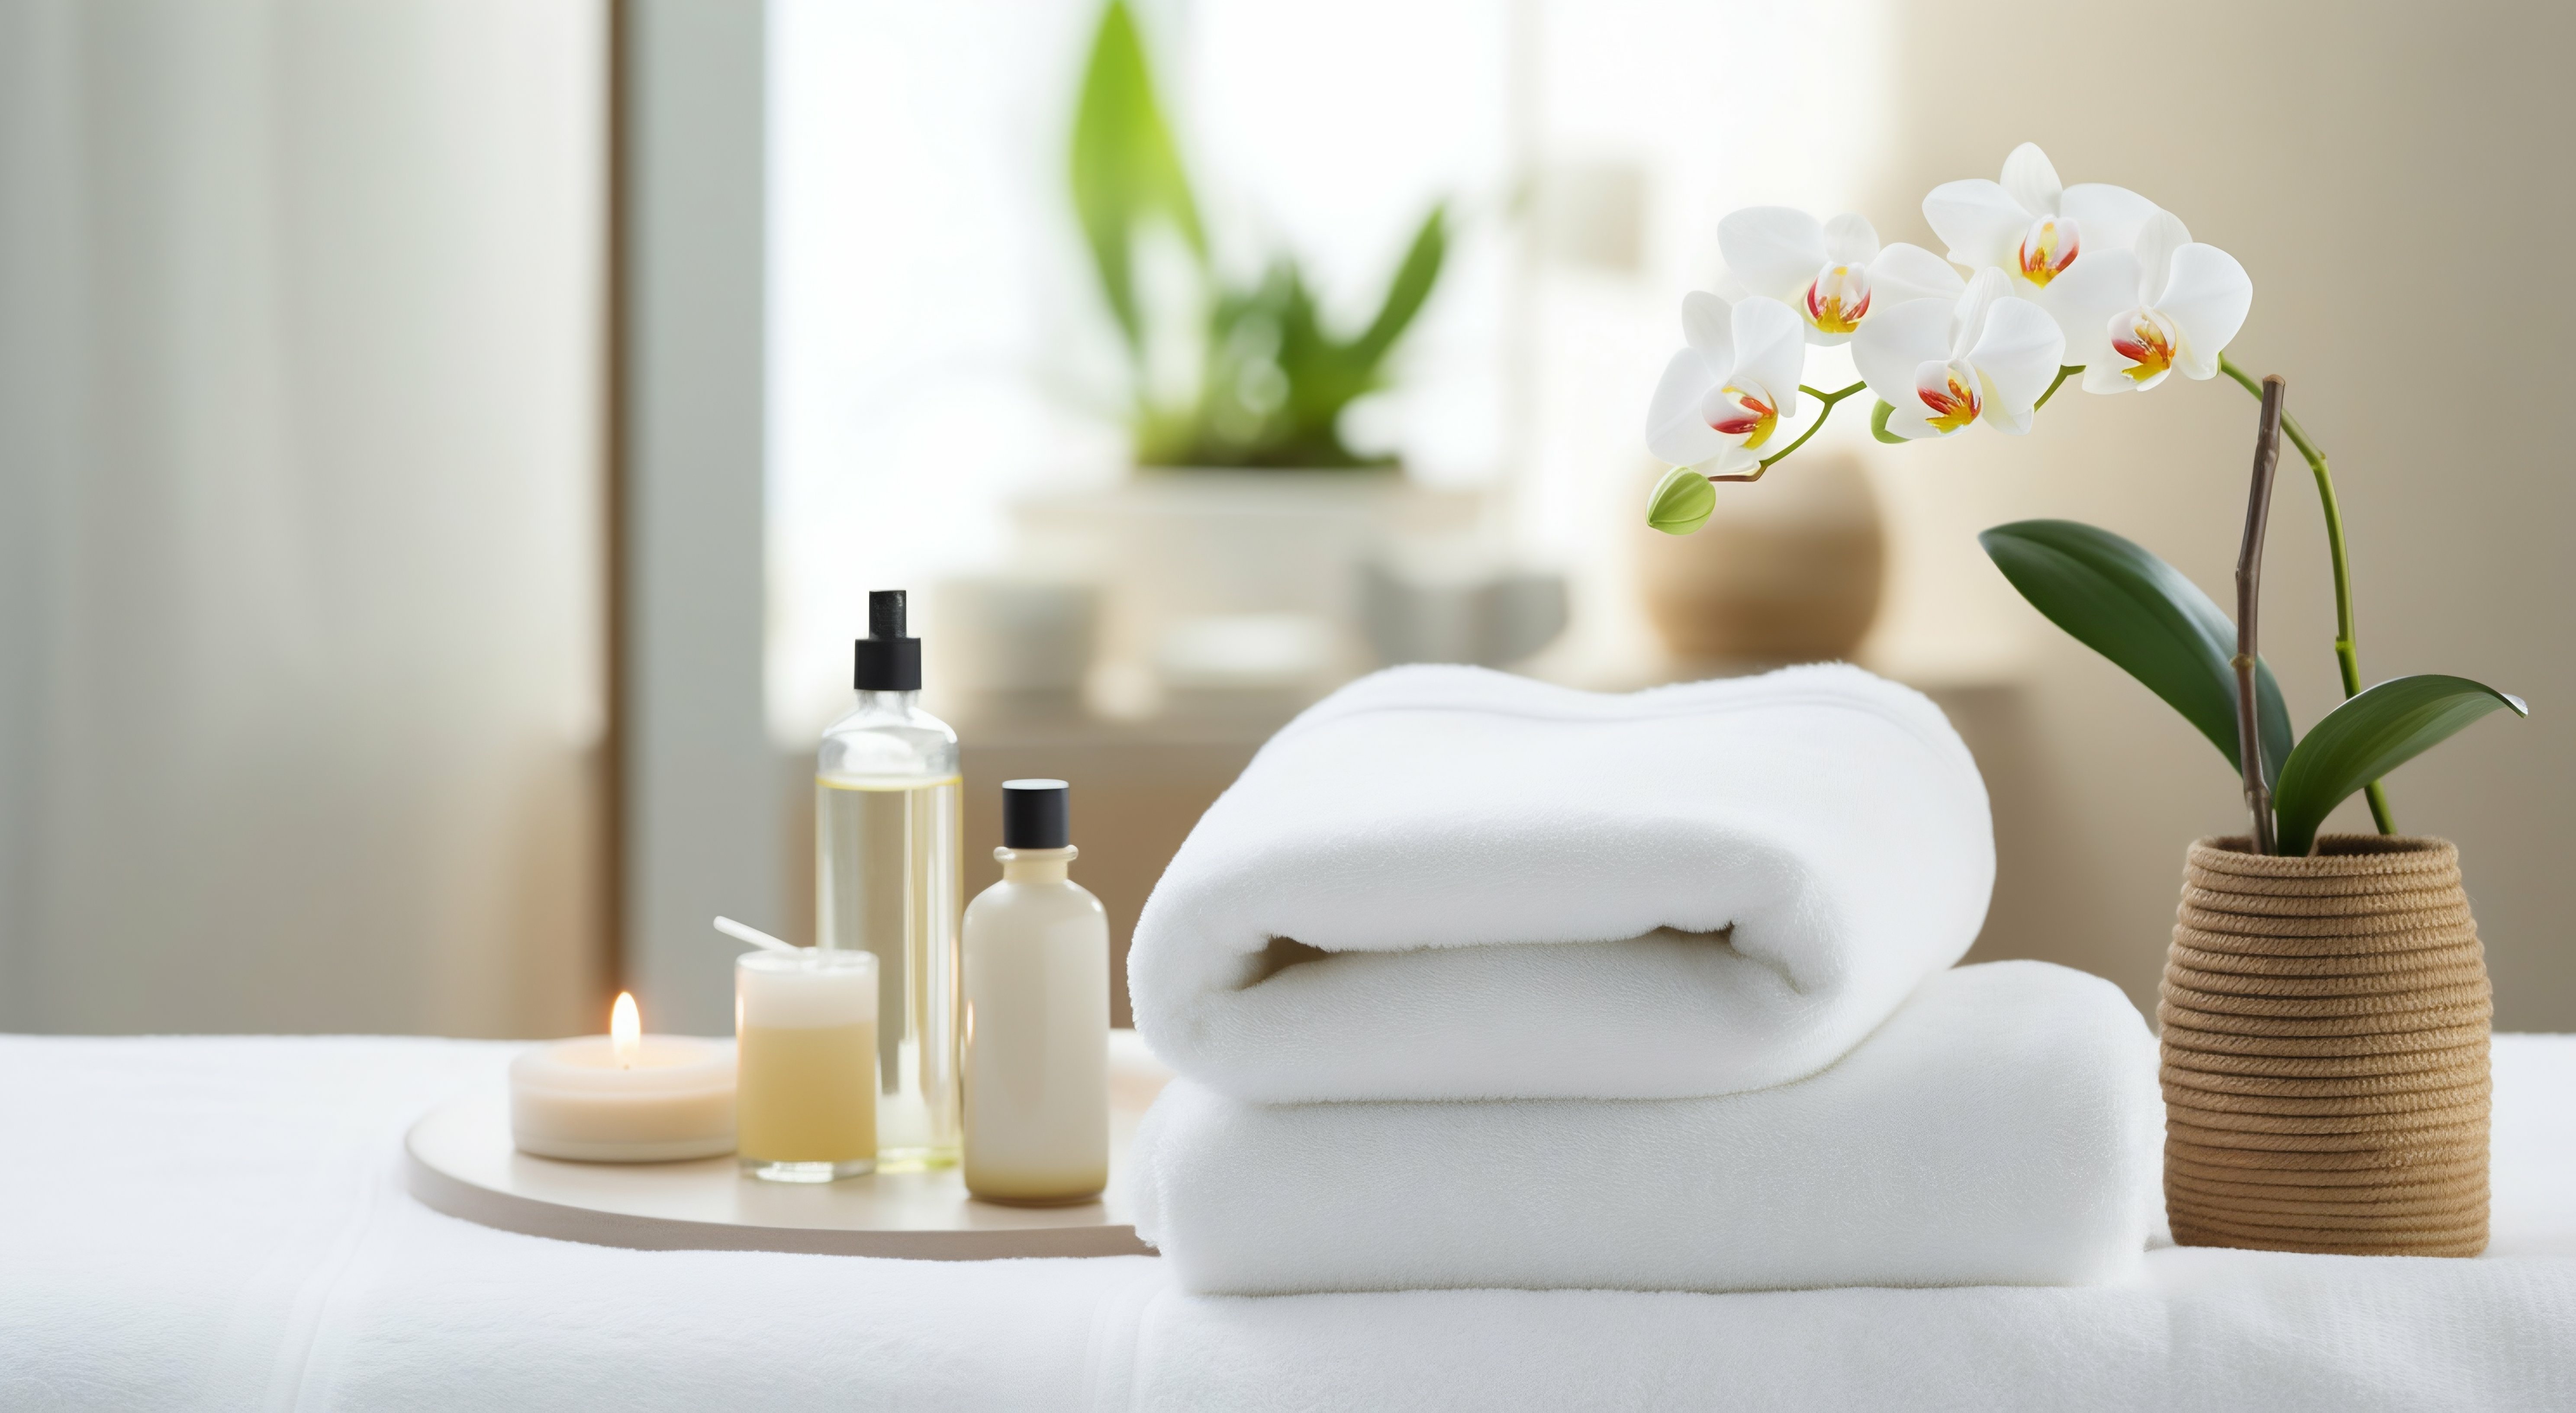 towels, flowers & personal care items